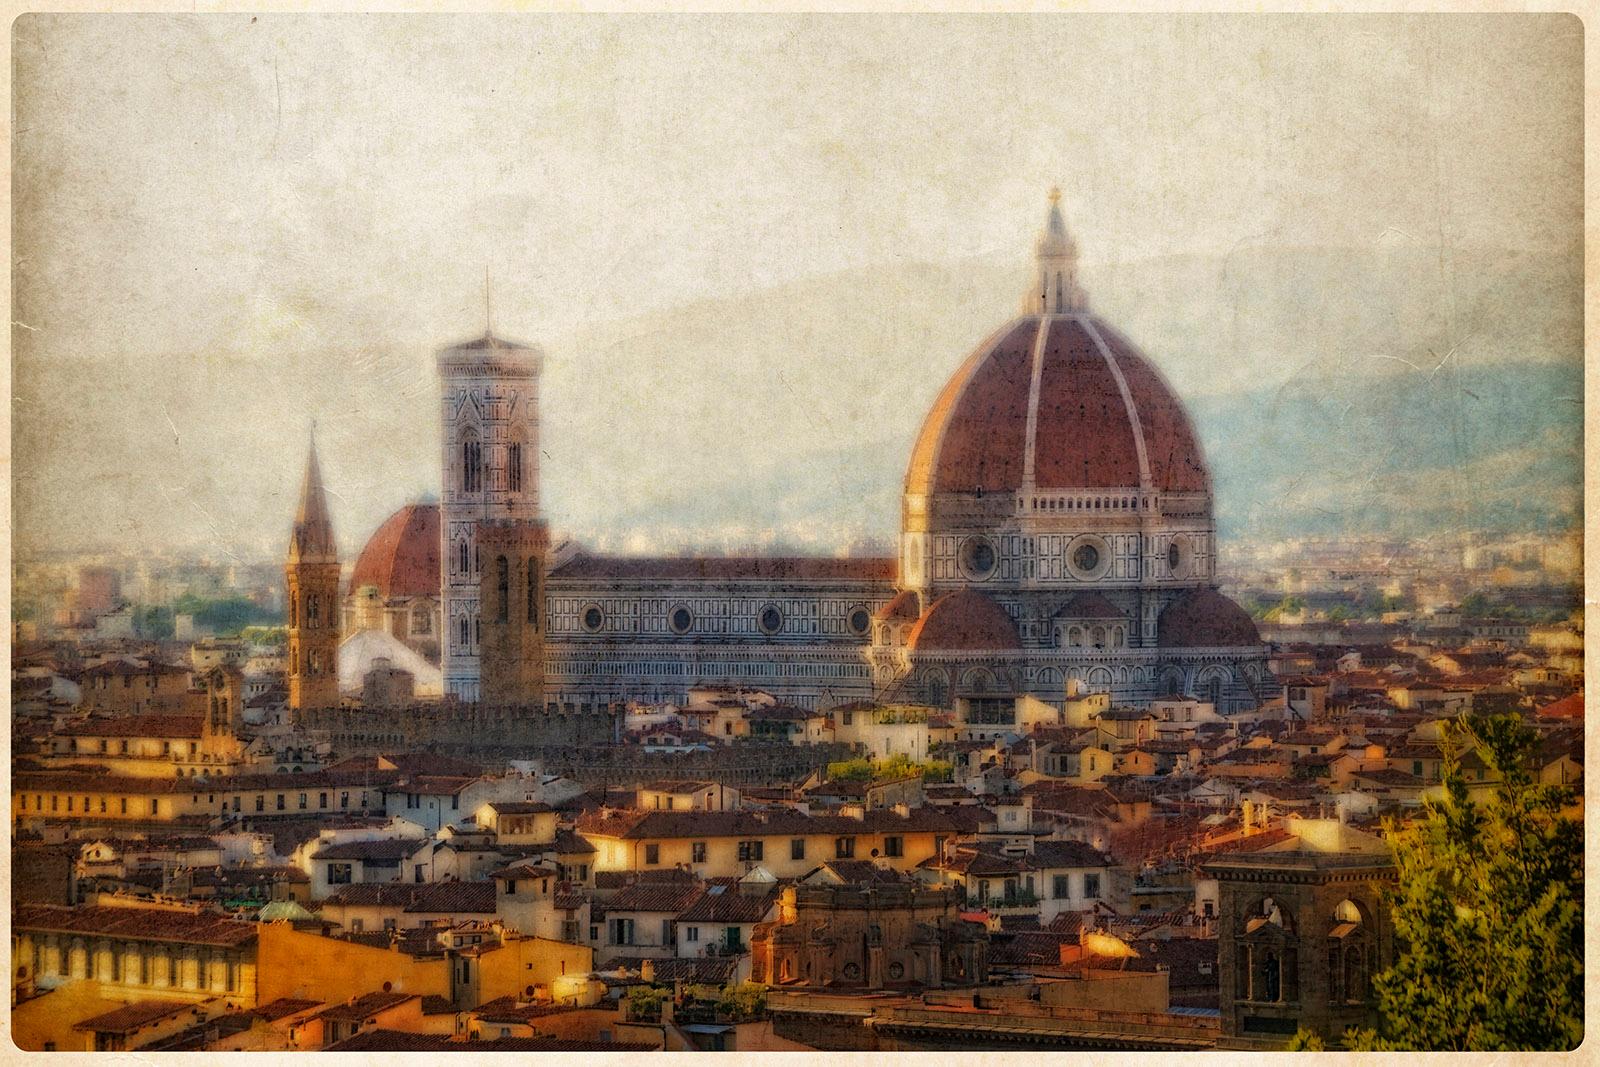 Michael Banks Landscape Photograph - Italia 3 - Signed limited edition architectural print, Large format brown photo